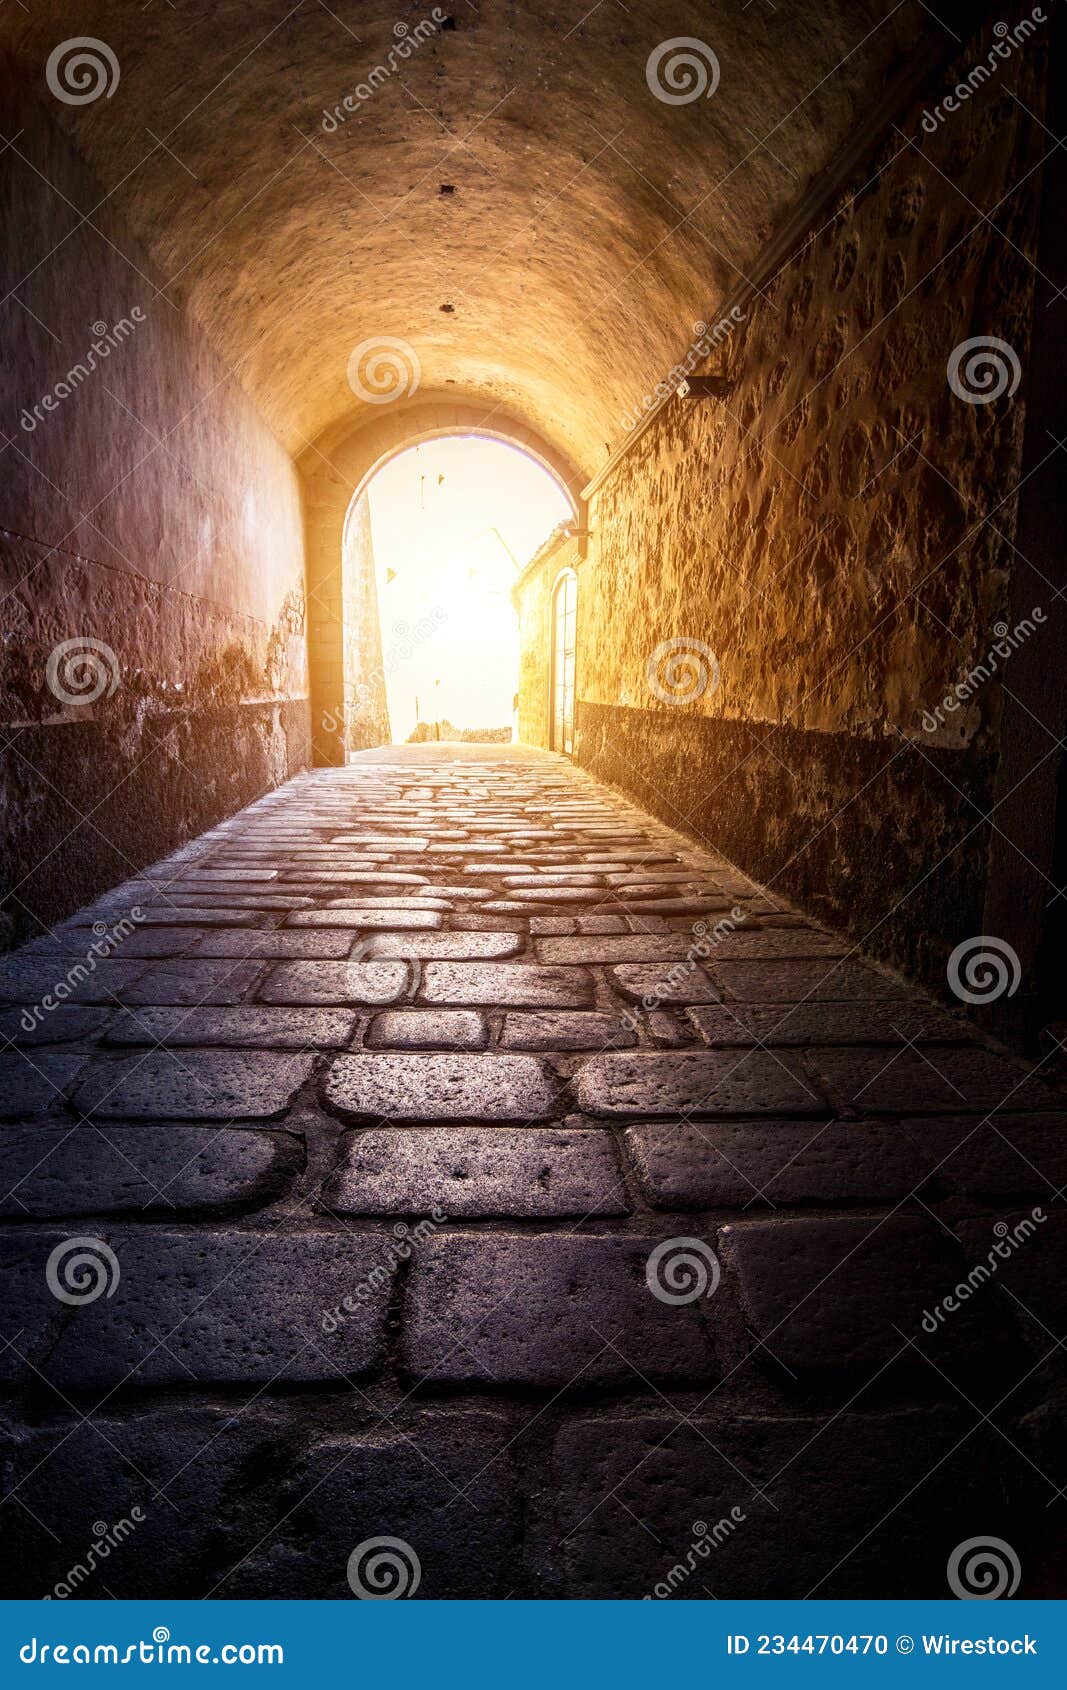 long tunnel on the sunshine background in casco antiguo, caceres, extremadura, spain